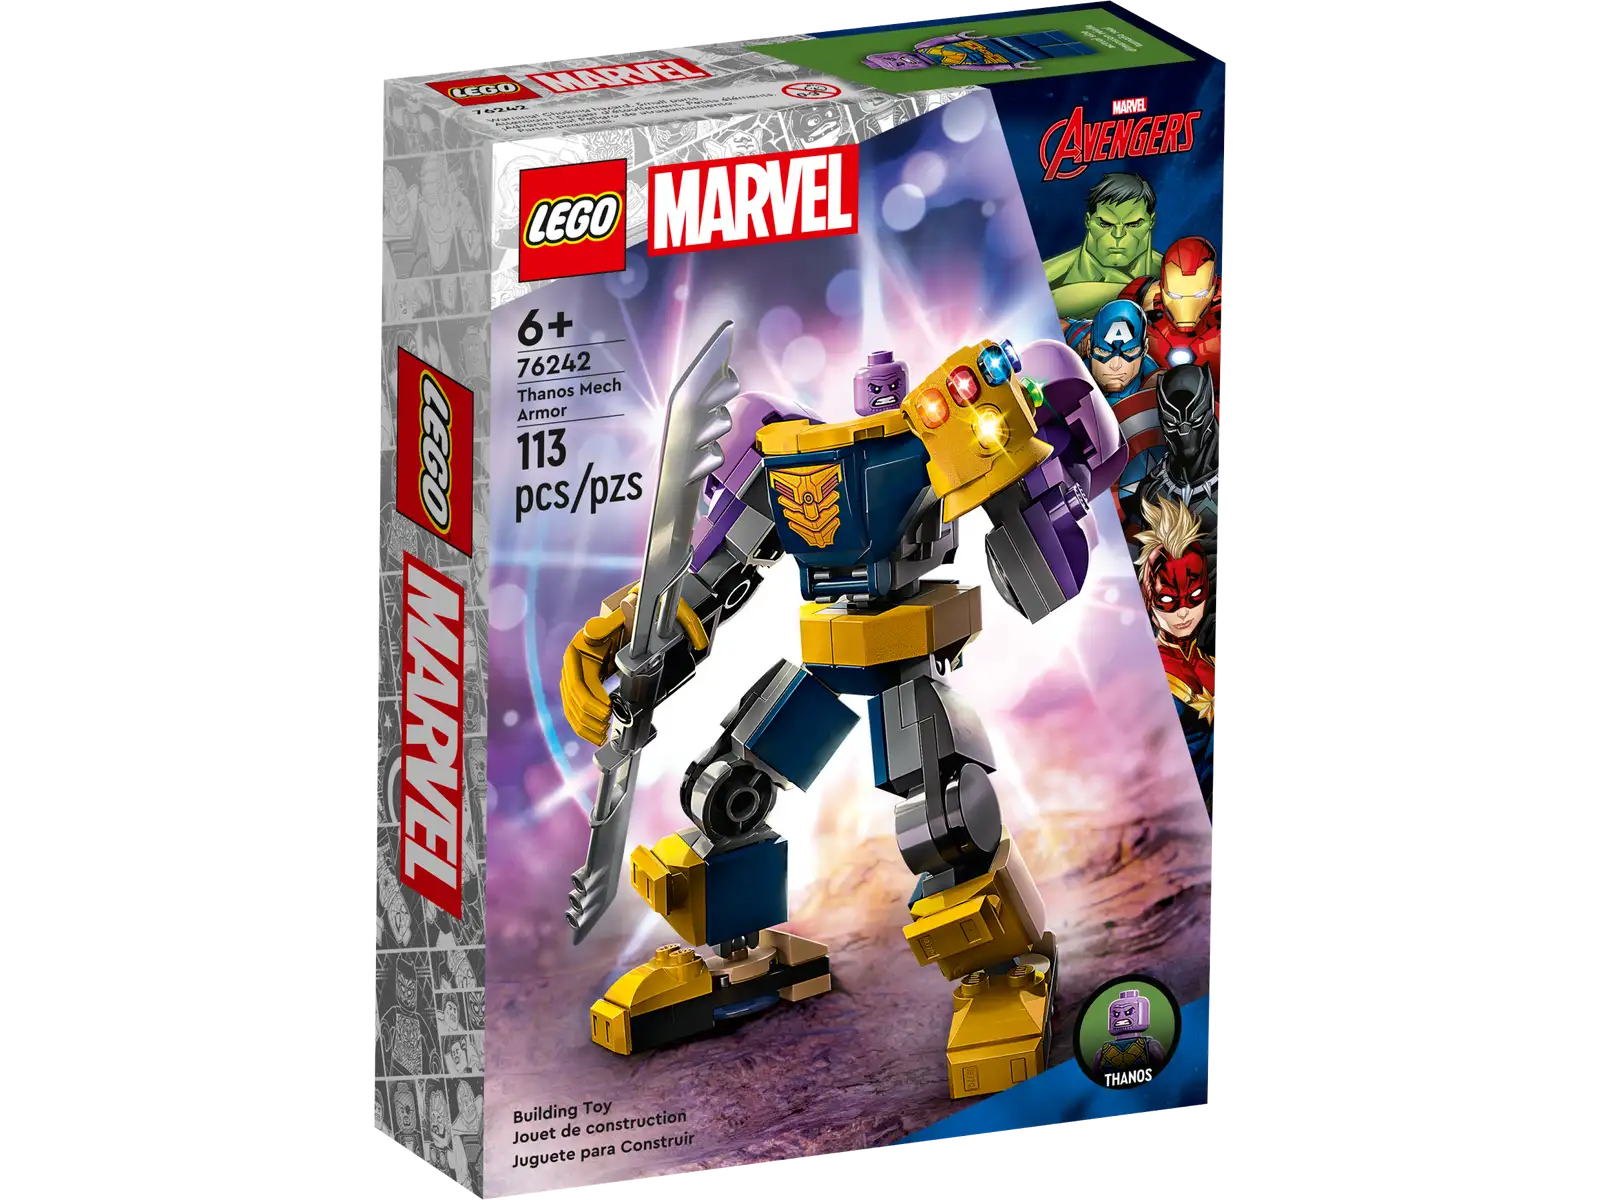 Fans of Marvel's Thanos will love this supersized Super Hero treat. LEGO® Marvel Thanos Mech Armor (76242) takes the universe’s most powerful super villain and makes him even more awesome! This is a great gift for kids aged 6 and up. Adjustable Thanos mech and minifigure The Thanos LEGO minifigure fits neatly into the opening cockpit of the mech. Fully jointed arms, legs and fingers allow it to be positioned and posed for imaginative play-and-display possibilities. The character’s famous double-sided sword, Infinity Gauntlet and Infinity Stones are also included to ensure the adventures never end. For added digital fun, the LEGO Builder app features intuitive zoom and rotate tools that let kids visualize their model as they build. Supersized super villain – LEGO® Marvel Thanos Mech Armor (76242) is a fully jointed giant that puts endless imaginative action into kids’ hands Authentic Marvel action – Includes a Thanos minifigure and a buildable Thanos mech with adjustable arms, legs and fingers, plus the iconic double-sided sword, Infinity Gauntlet and Infinity Stones Easy to position and pose – The Thanos minifigure fits into the opening cockpit of the mech, whose movable limbs adjust for endless play-and-display possibilities Gift for Marvel fans – Give kids aged 6 and up this hands-on, build-and-play toy as a birthday, holiday or any-day treat Take-anywhere figure – Standing over 4 in. (12 cm) tall, this pick-up-and-play building toy delivers big fun wherever kids go Interactive digital building – The LEGO® Builder app features intuitive zoom and rotate tools that let kids visualize their model as they build Unlimited Super Hero fun – The extensive range of LEGO® Marvel building toys is designed to deliver endless imaginative build-and-play possibilities Quality guaranteed – LEGO® components fulfill stringent industry quality standards to ensure they are consistent, compatible and connect smoothly every time Safety assured – LEGO® components are dropped, heated, crushed, twisted and analyzed to make sure they satisfy rigorous global safety standards